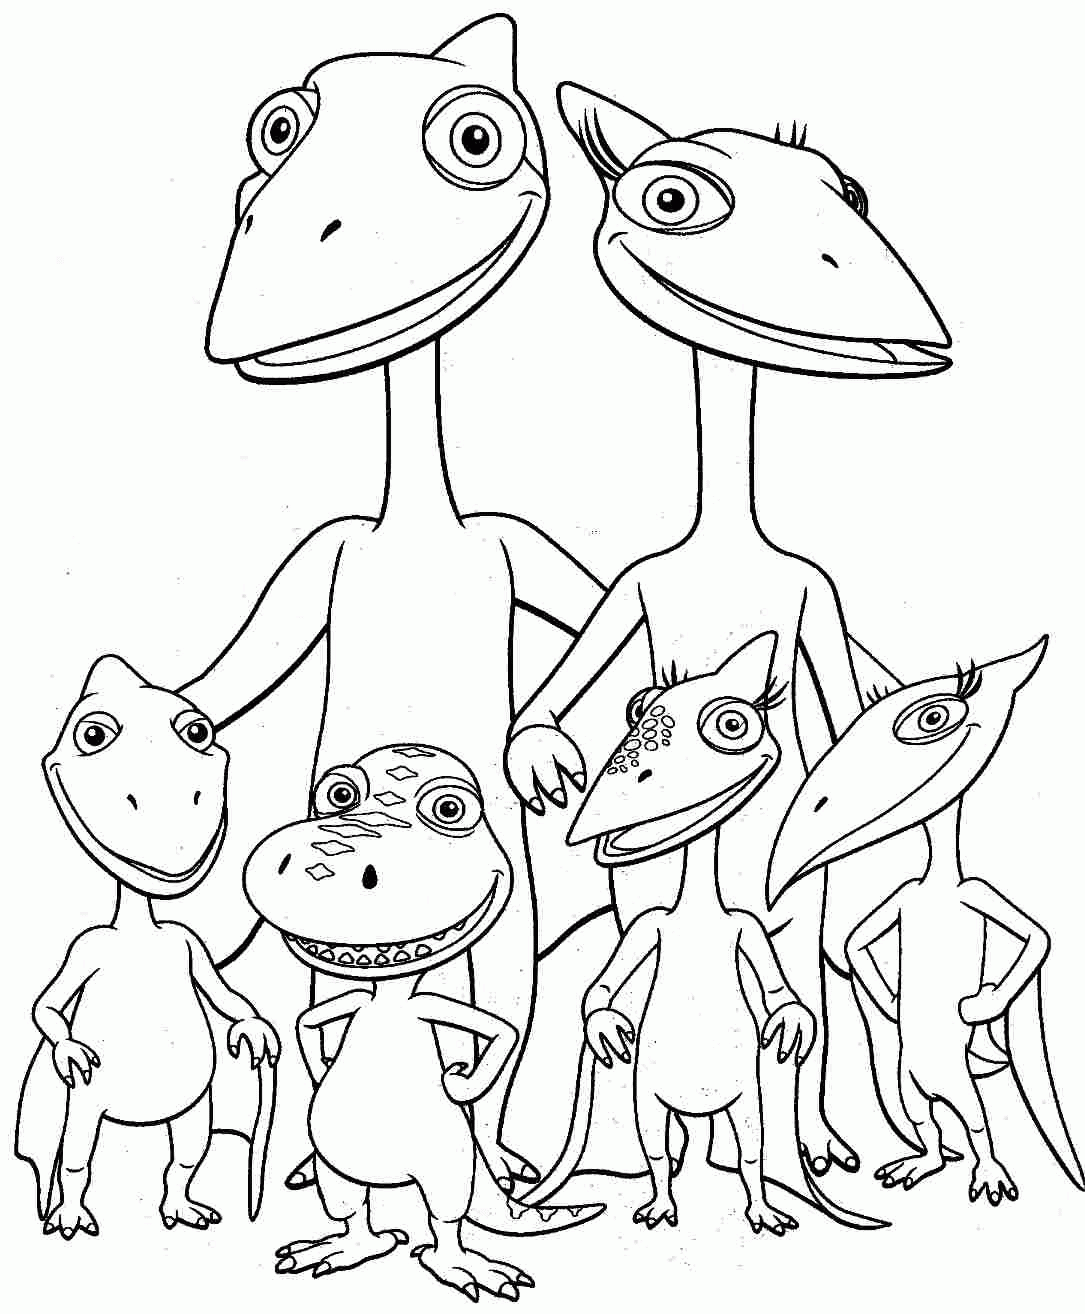 Pteranodon Coloring Page - Coloring Home